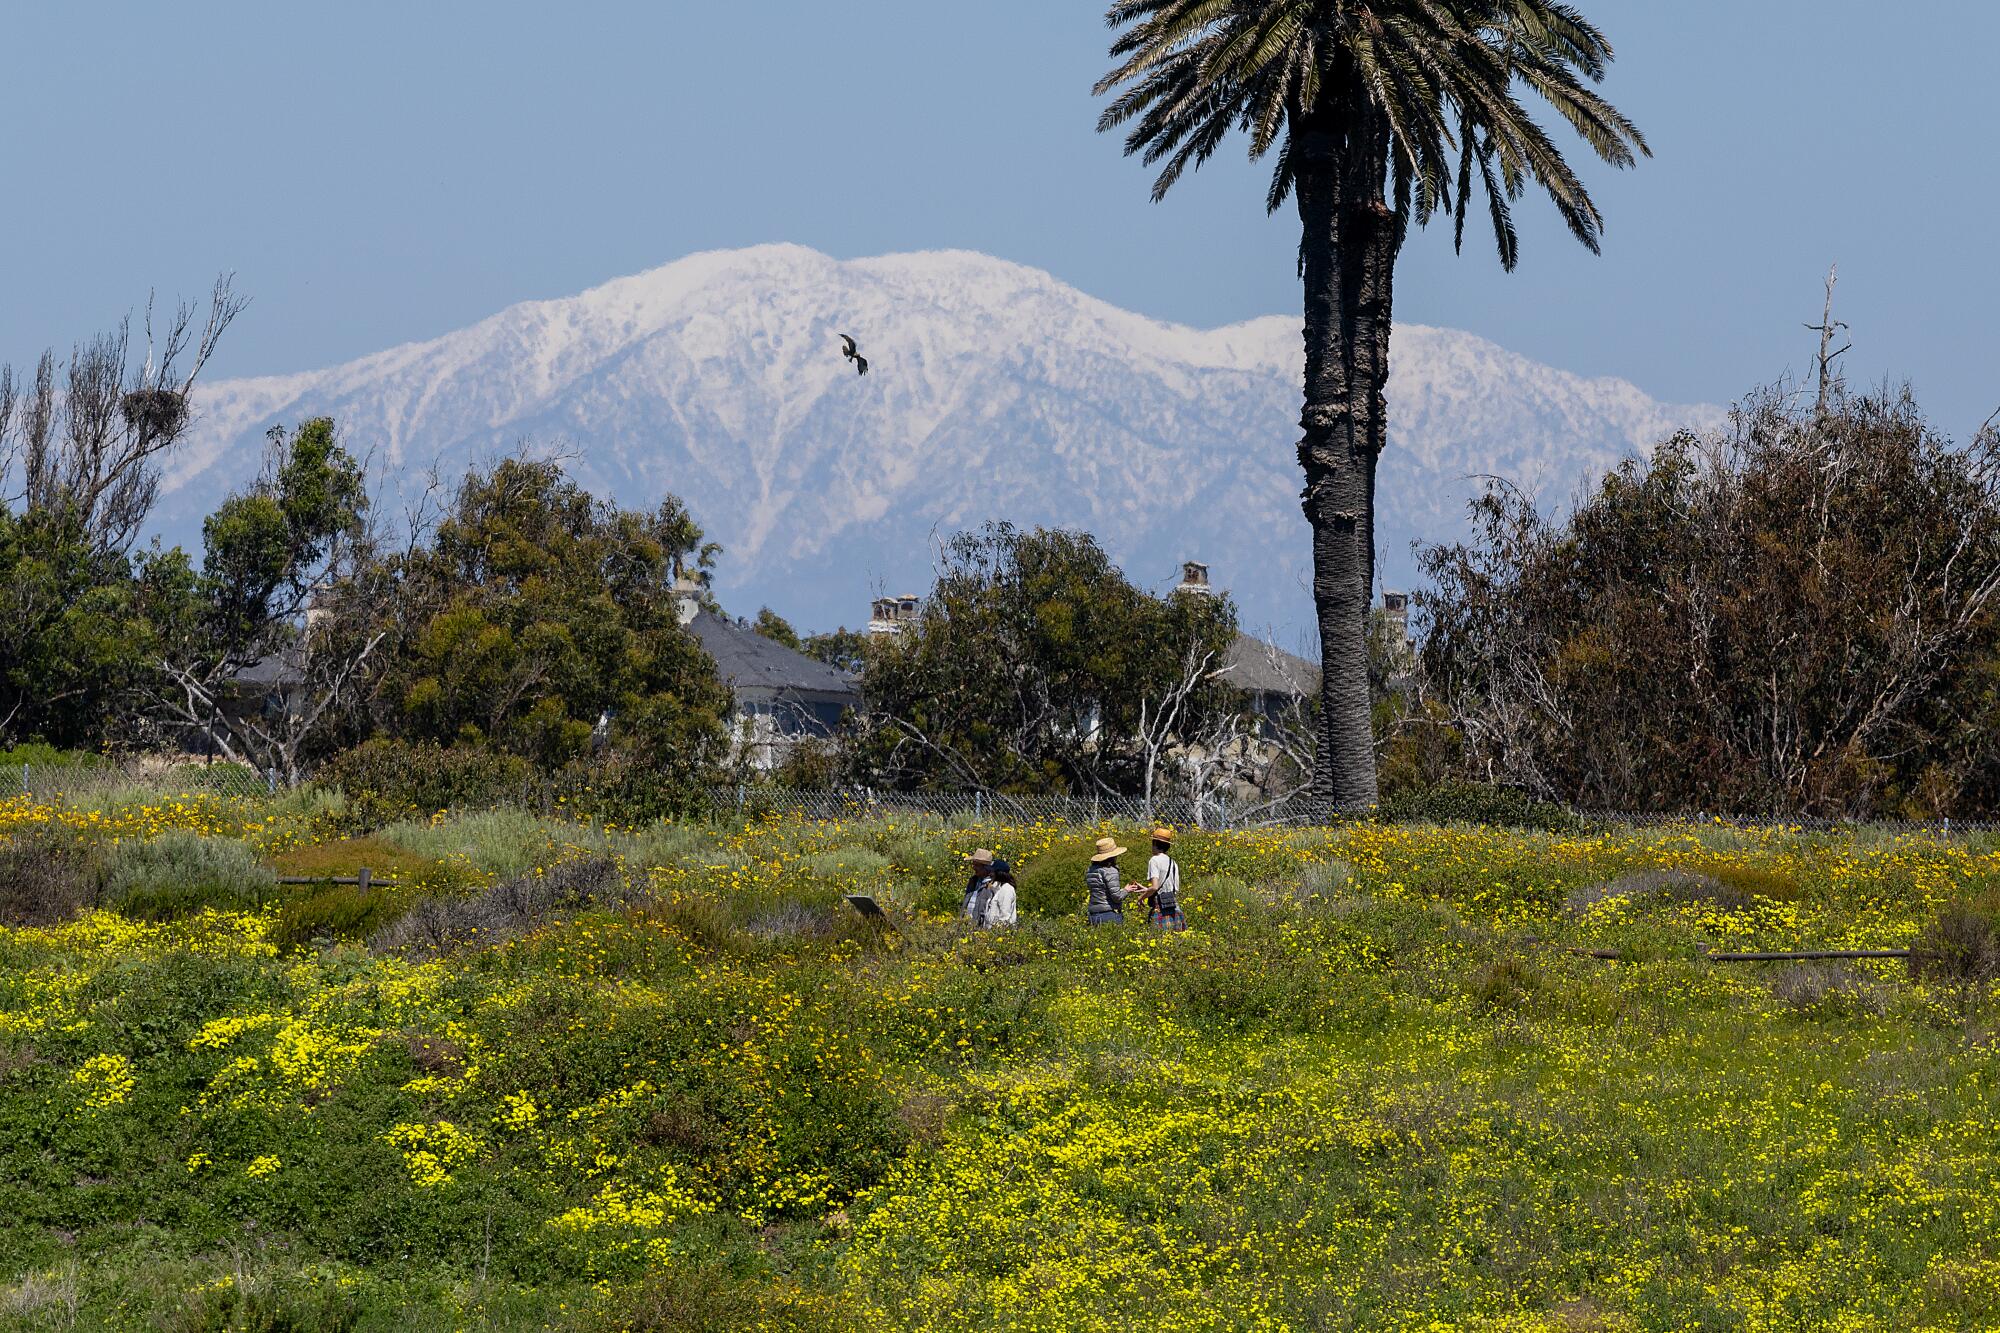 Hikers enjoy a scenic view of wildflowers before the snow-capped San Gabriel Mountains in the background.